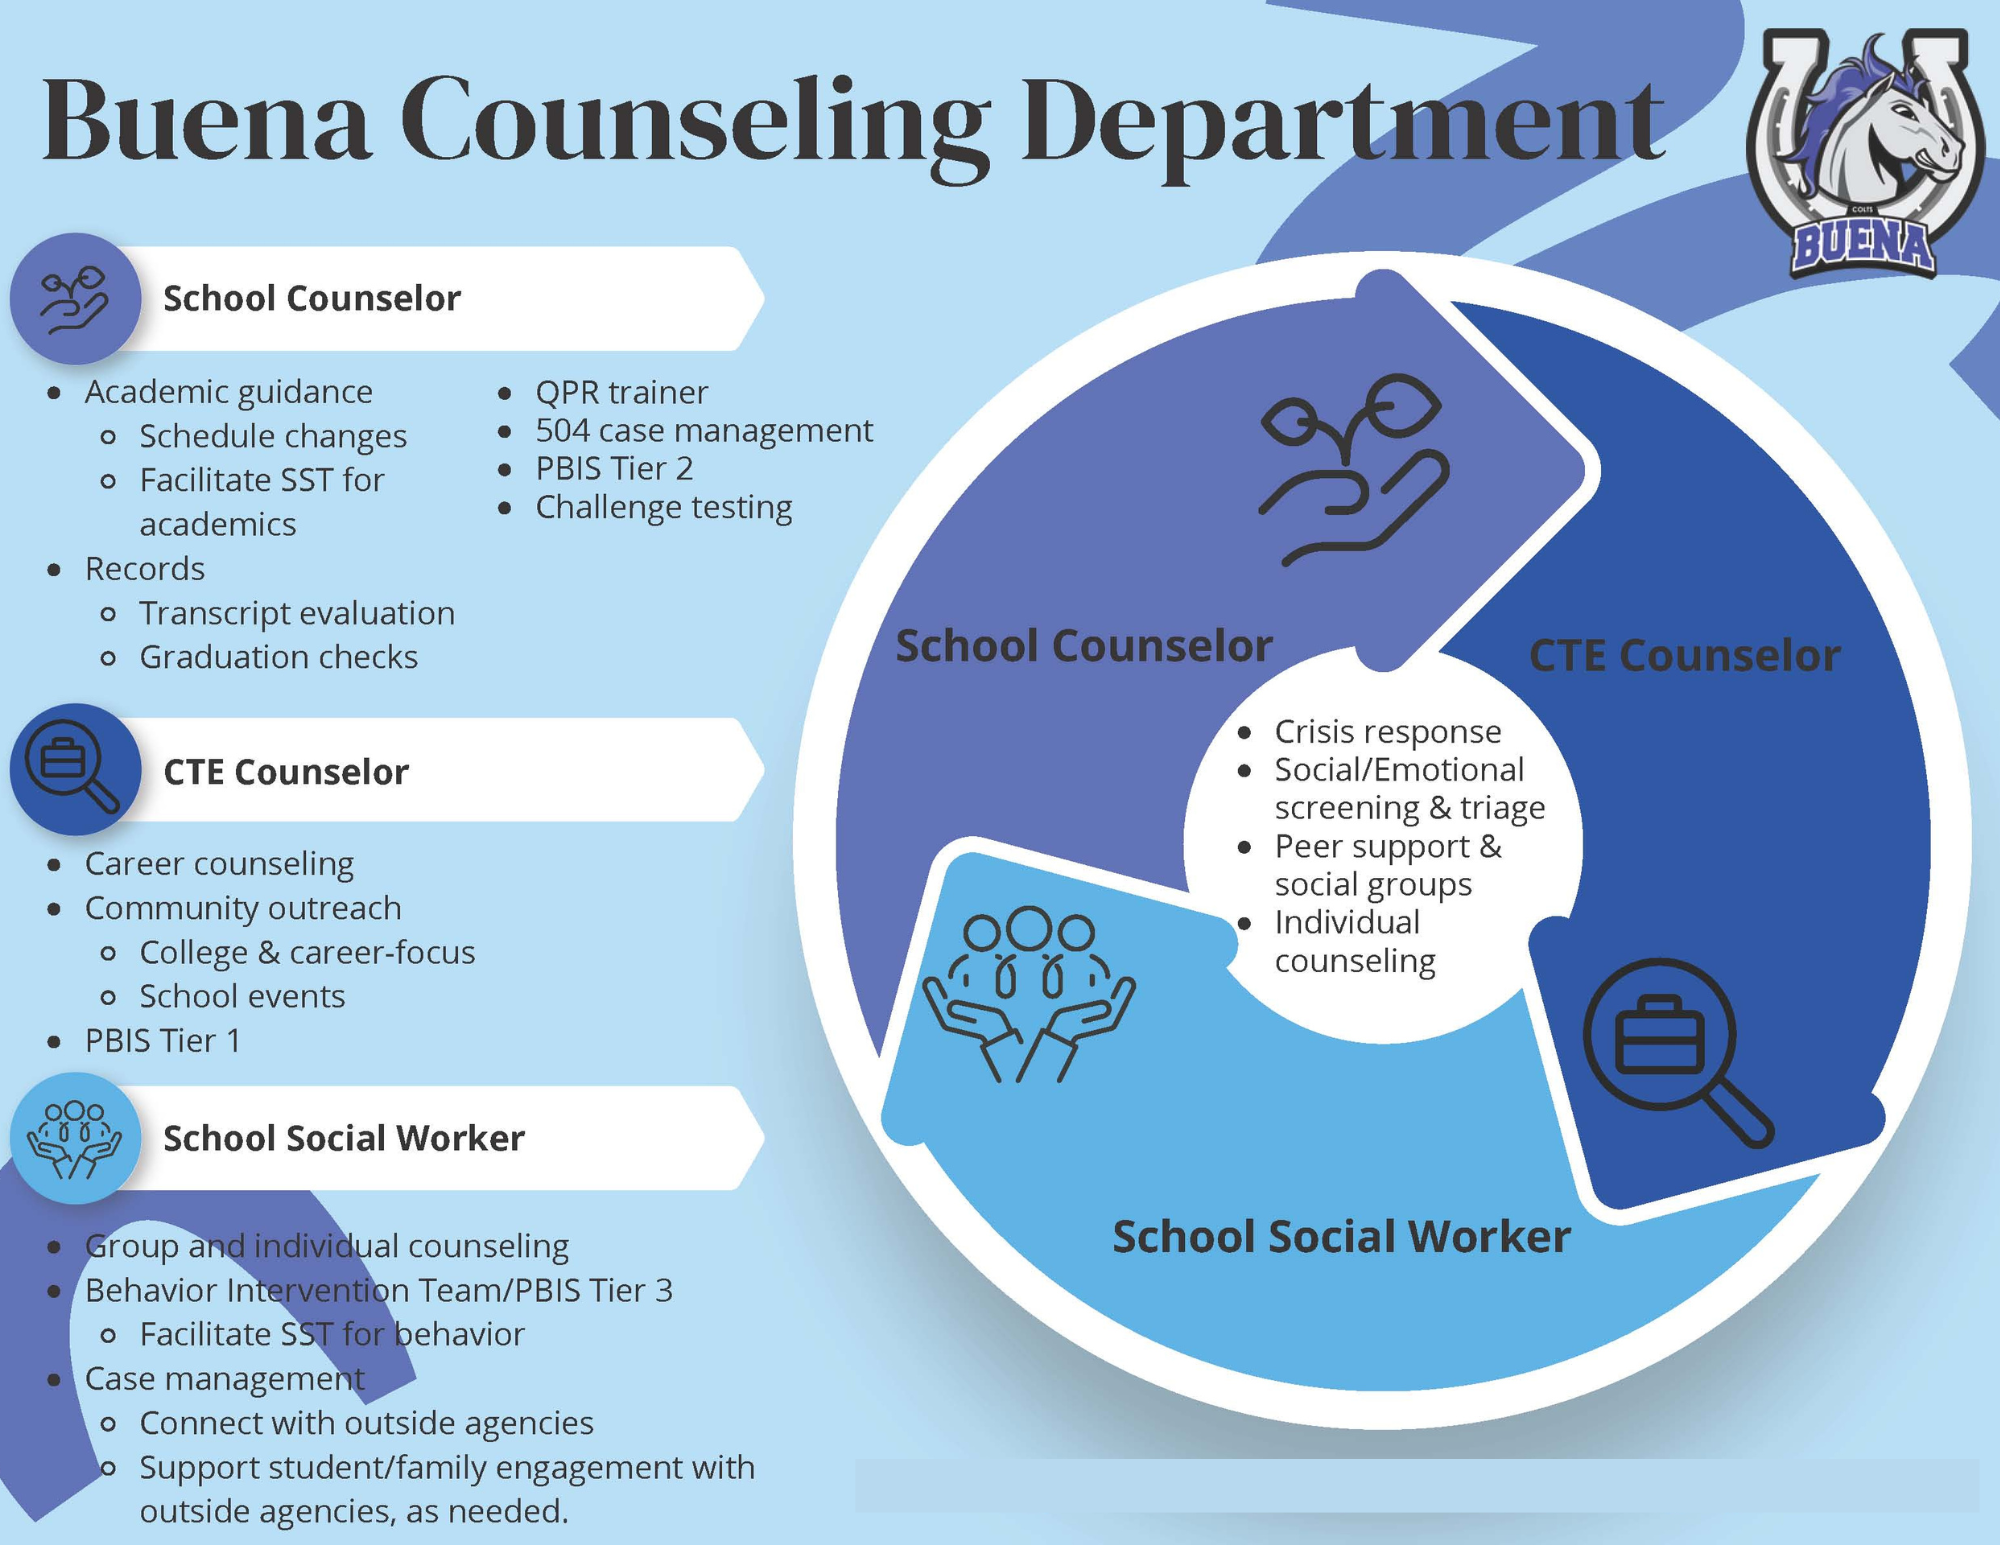 Buena Counseling Department